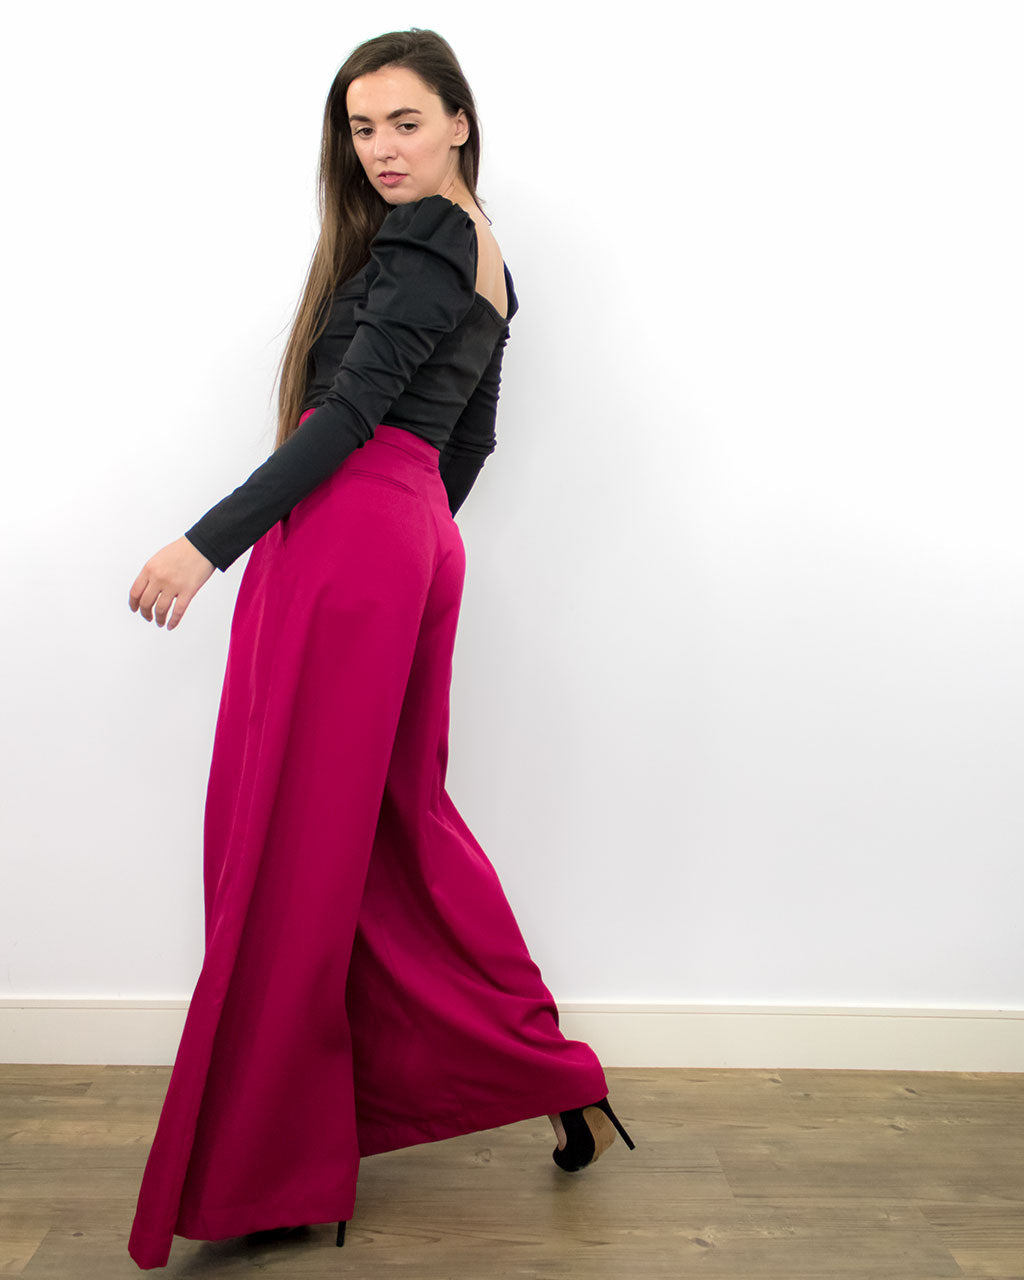 Ethical tailored wide leg smart work or evening party sustainable red high waist trousers from recycled PET ADKN made in UK